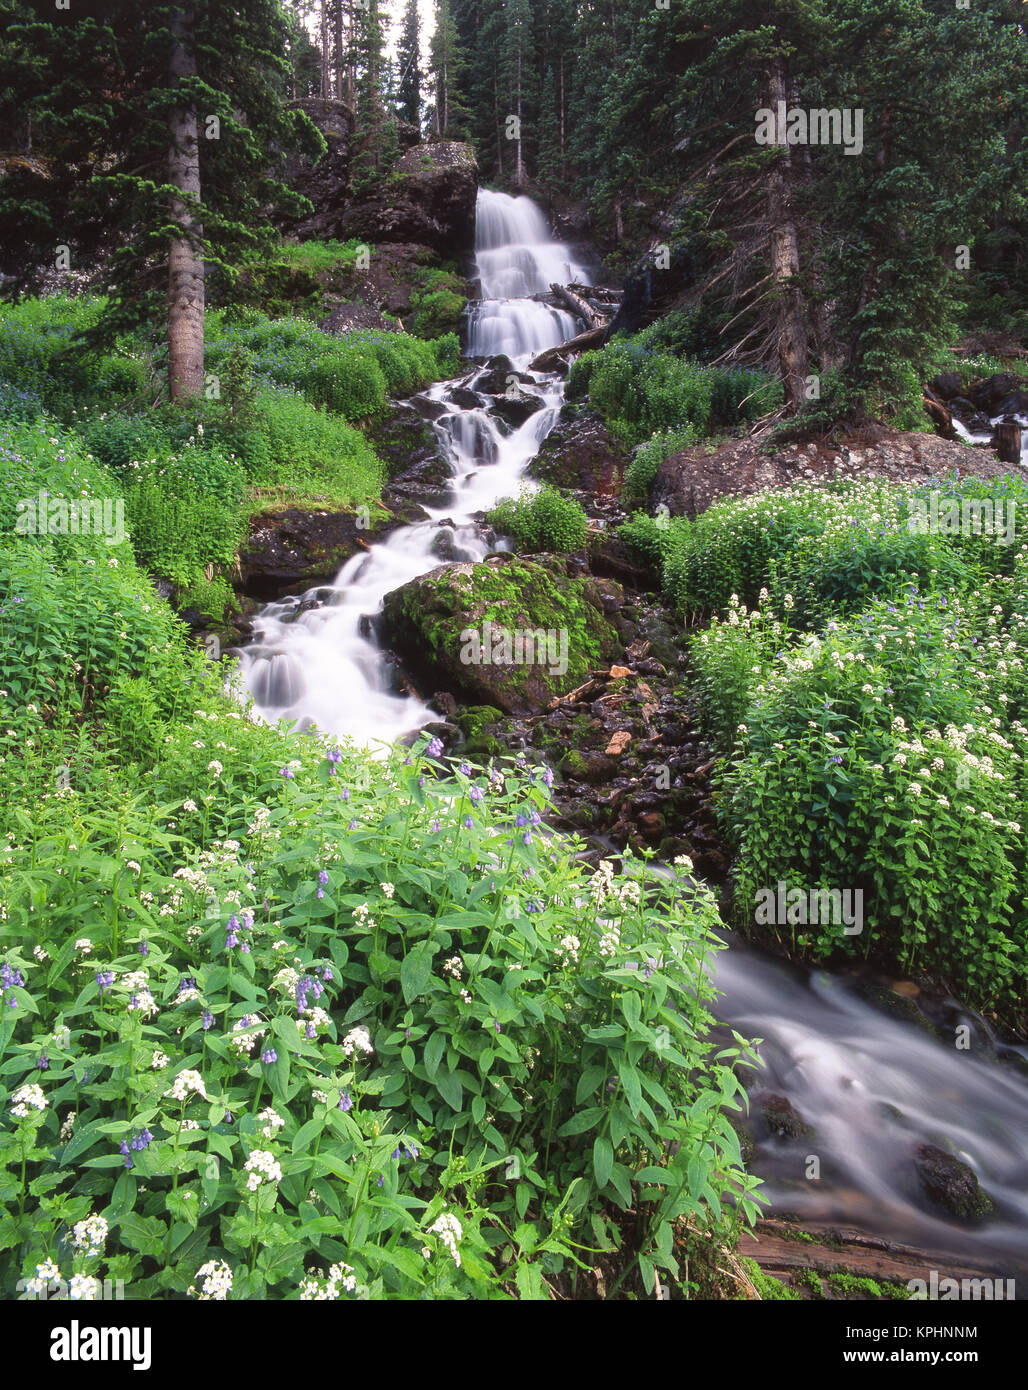 Stream lined with Bitter Cress (Cardamine cordifolia) and mountain Bluebells (Mertensia ciliata) (Large format sizes available) Stock Photo